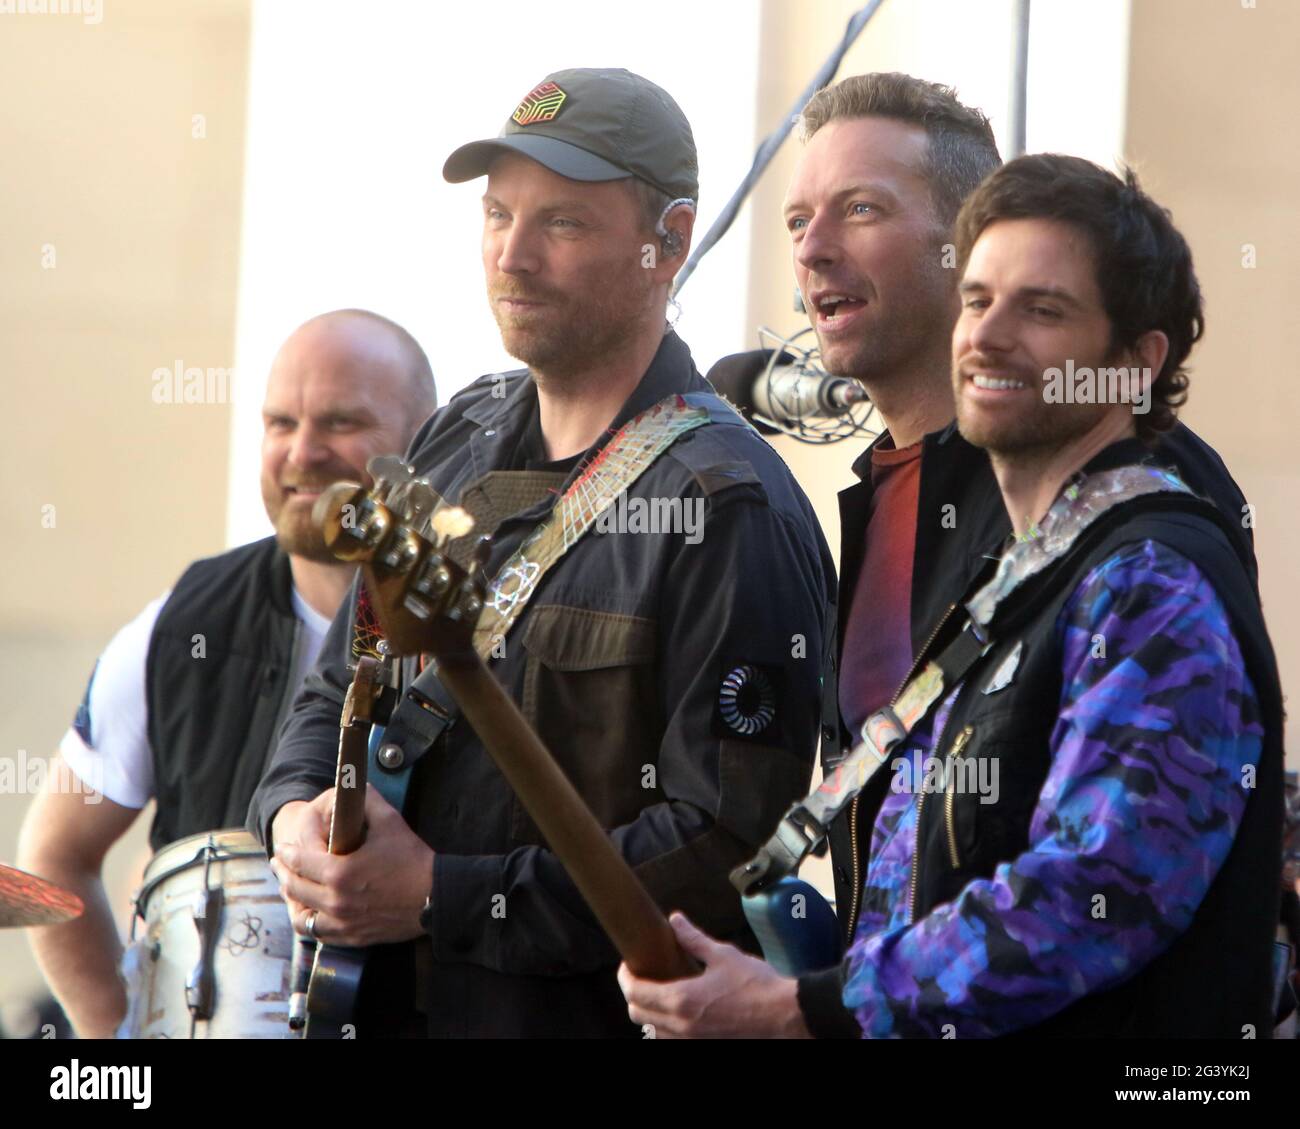 Will Champion of Coldplay arrives at the BBC Radio 1 studios London,  England - 17.12.10 Stock Photo - Alamy